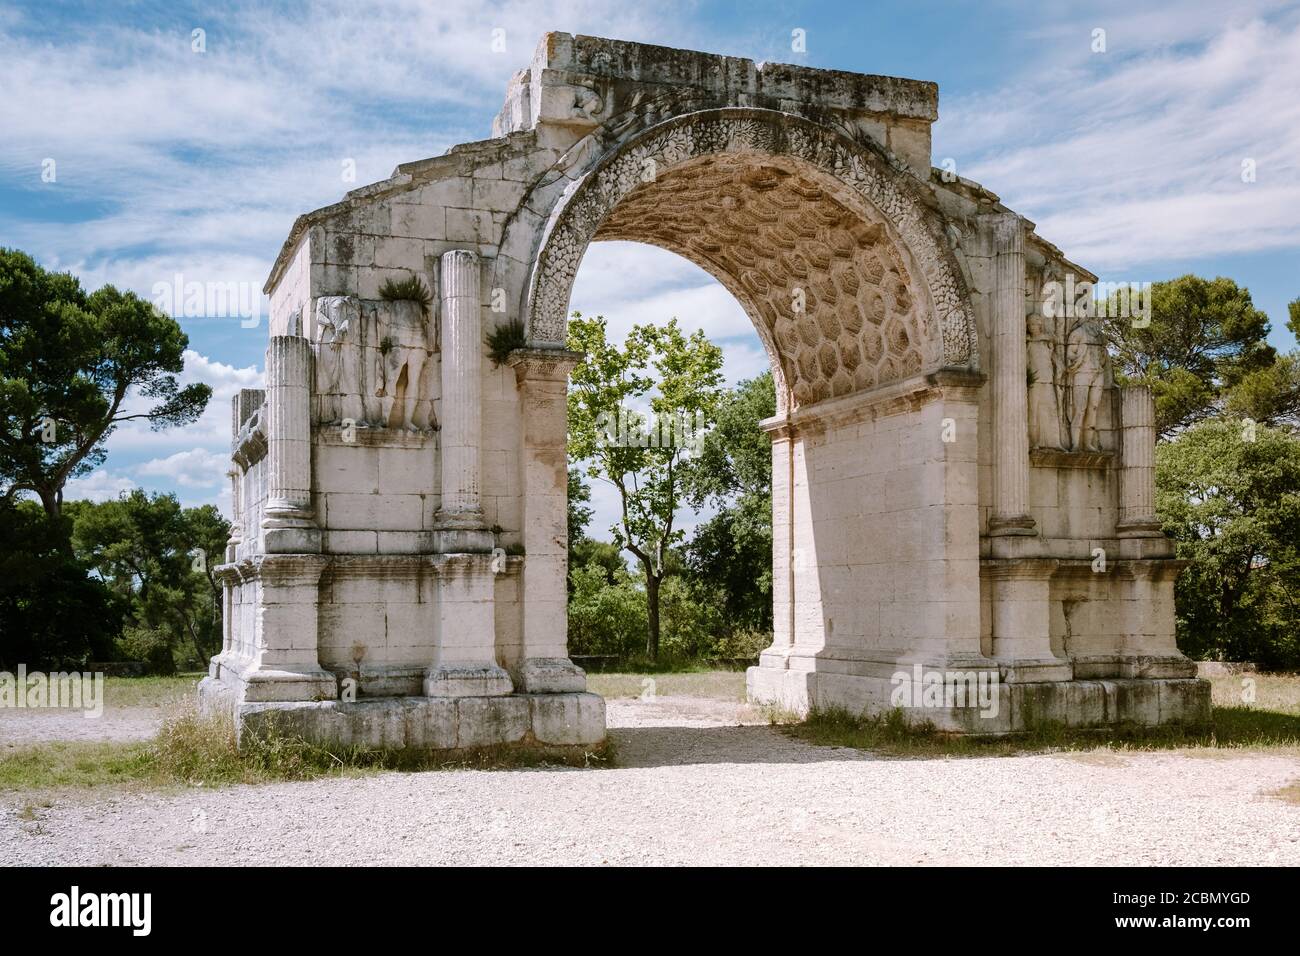 Les Antiques monument which is a part of Glanum archaeological site near Saint Remy de Provence in France Stock Photo